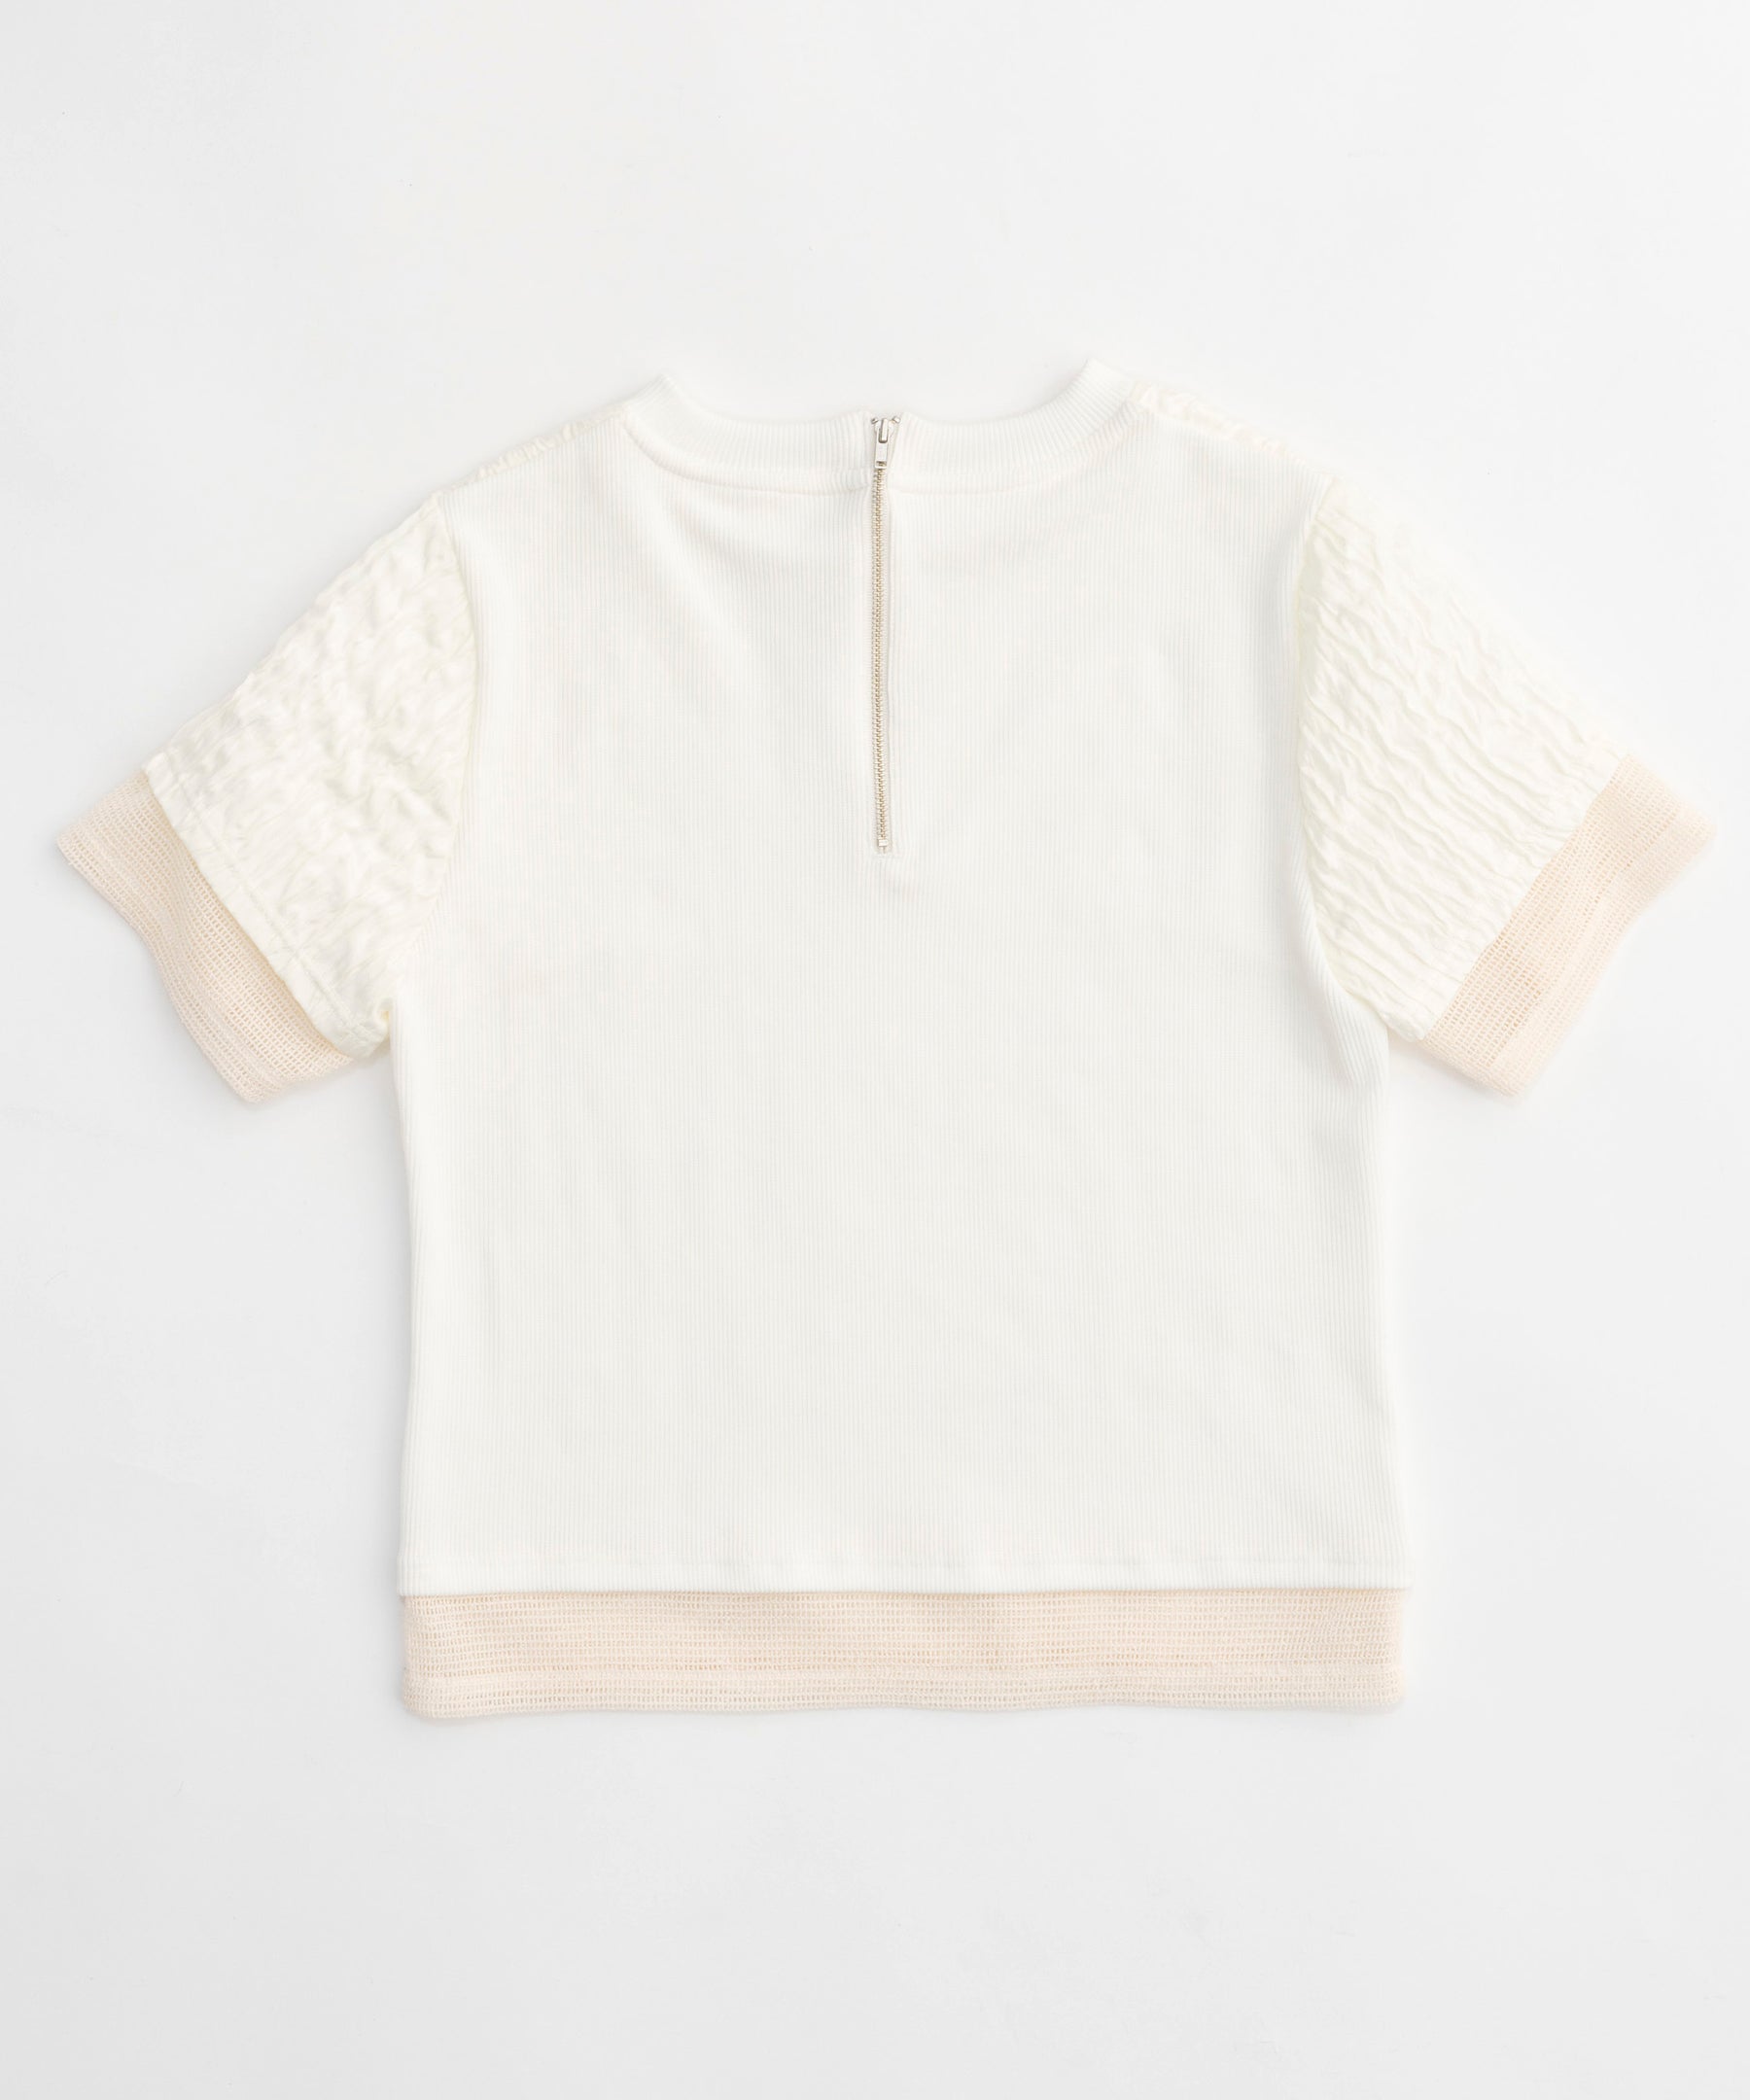 【24SUMMER PRE-ORDER】Floating Jacquard Compact Tops